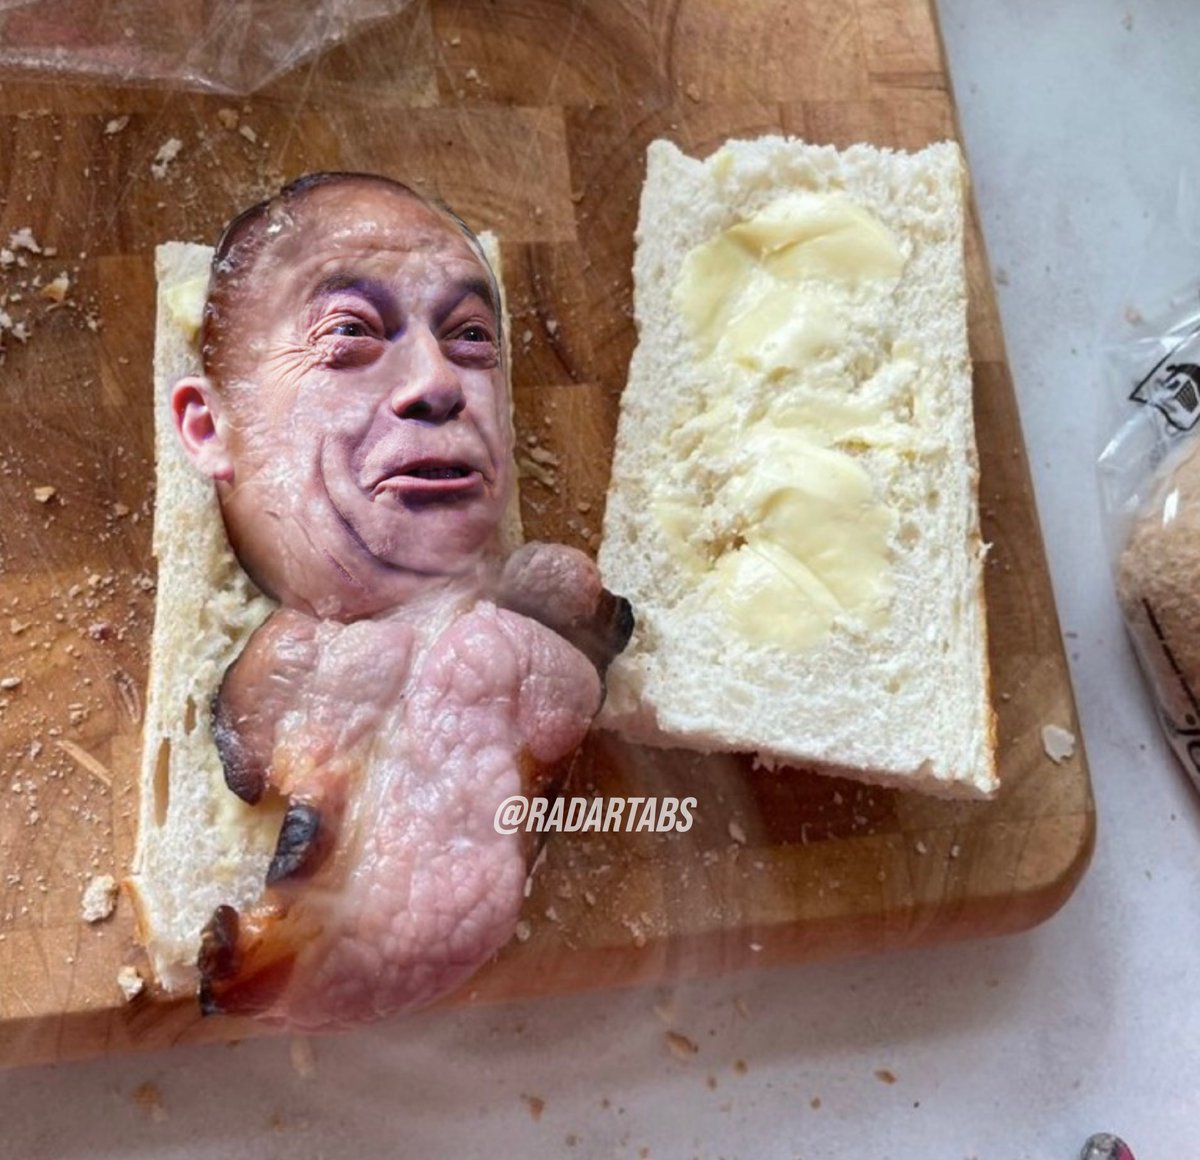 Thanks to @AndyPlumb4 for the inspiration... although I now feel a bit sick... #NigelFarage